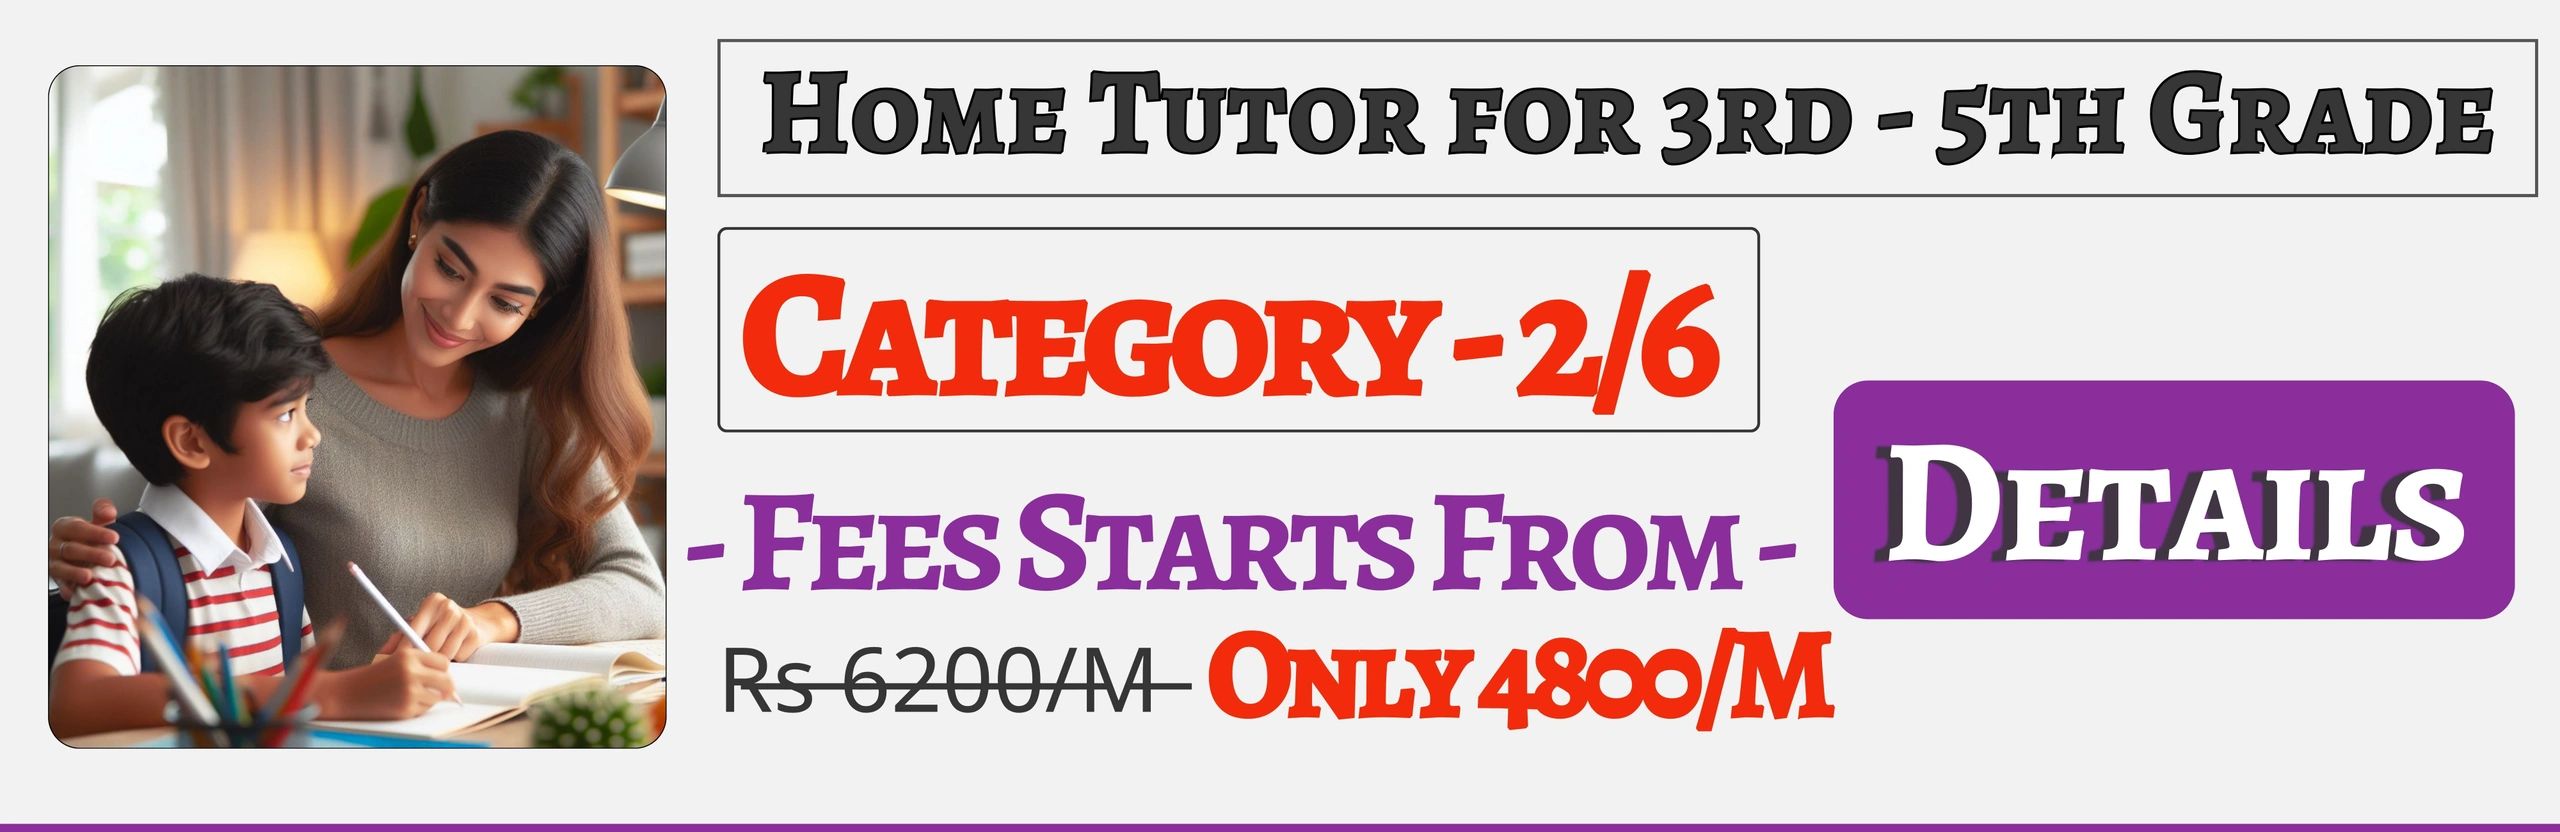 Book Best Home Tuition Tutors For 3rd , 4th & 5th In Jaipur , Fees Only 4800/M